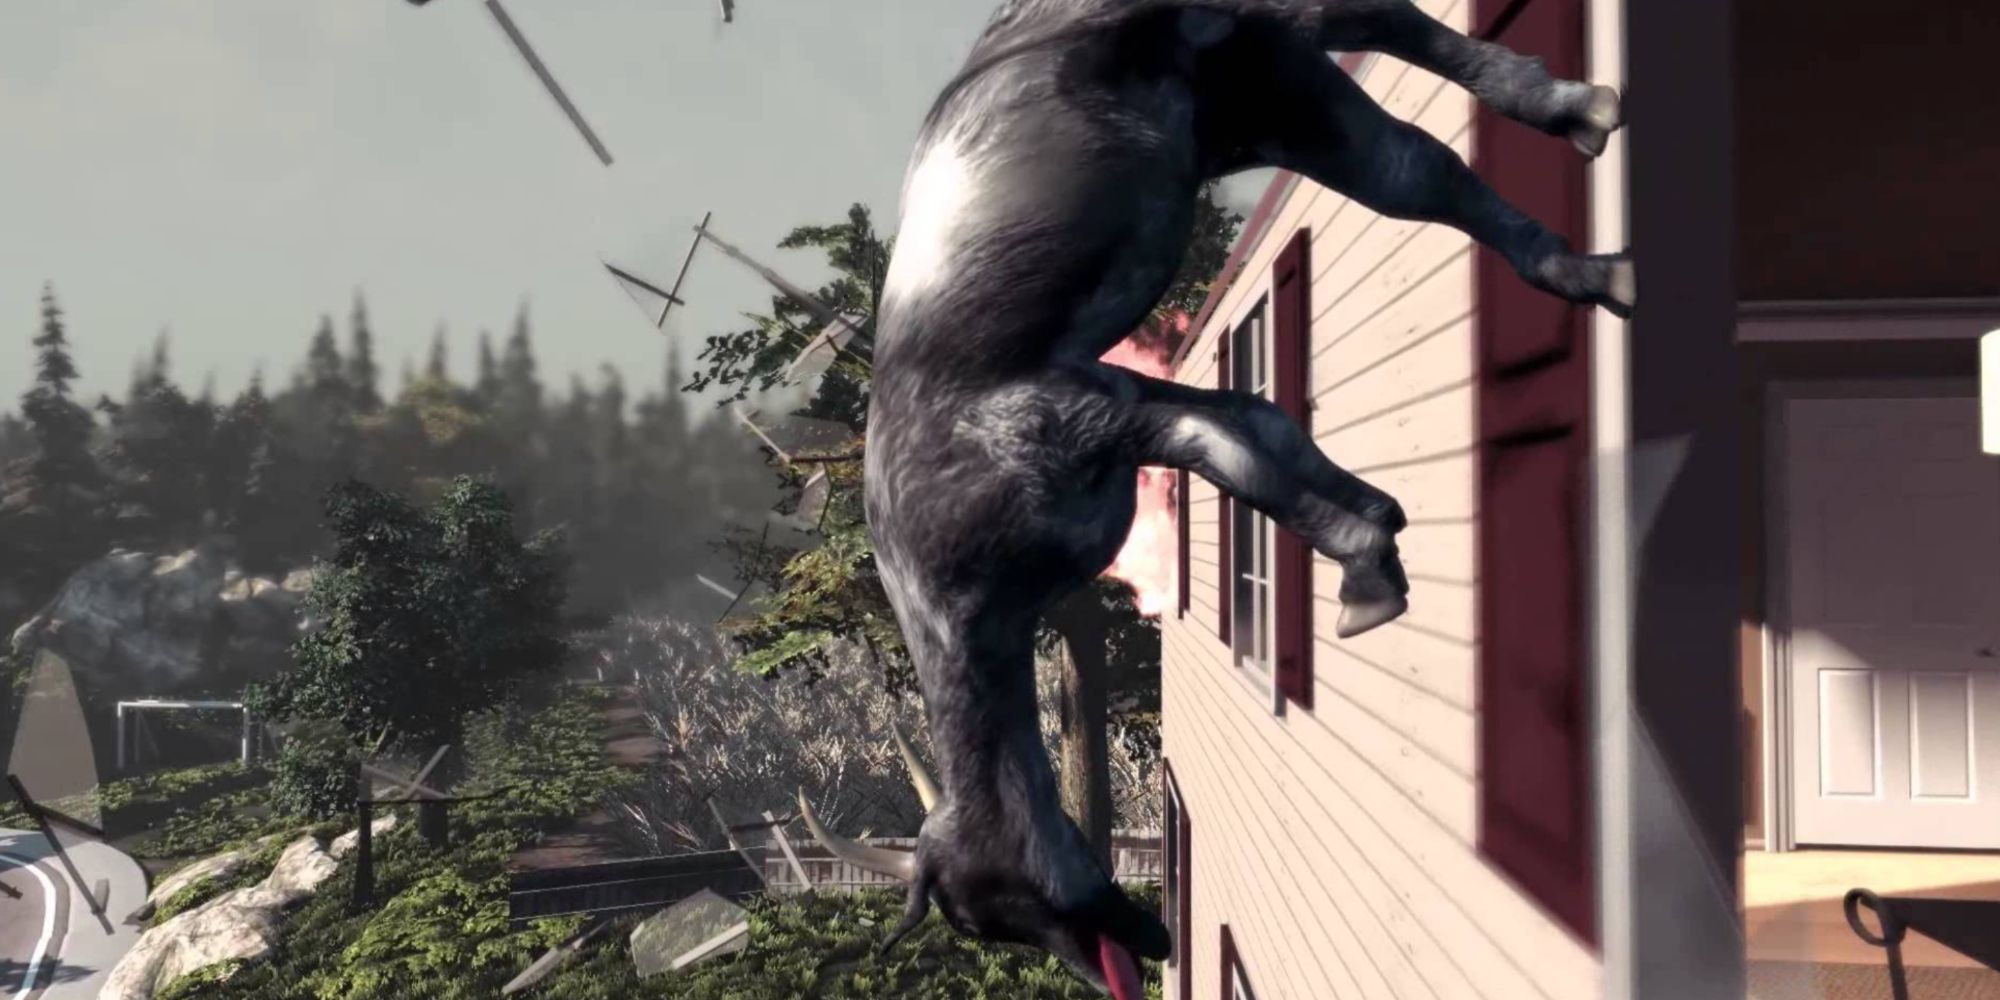 Goat flying out of a smashed window in Goat Simulator